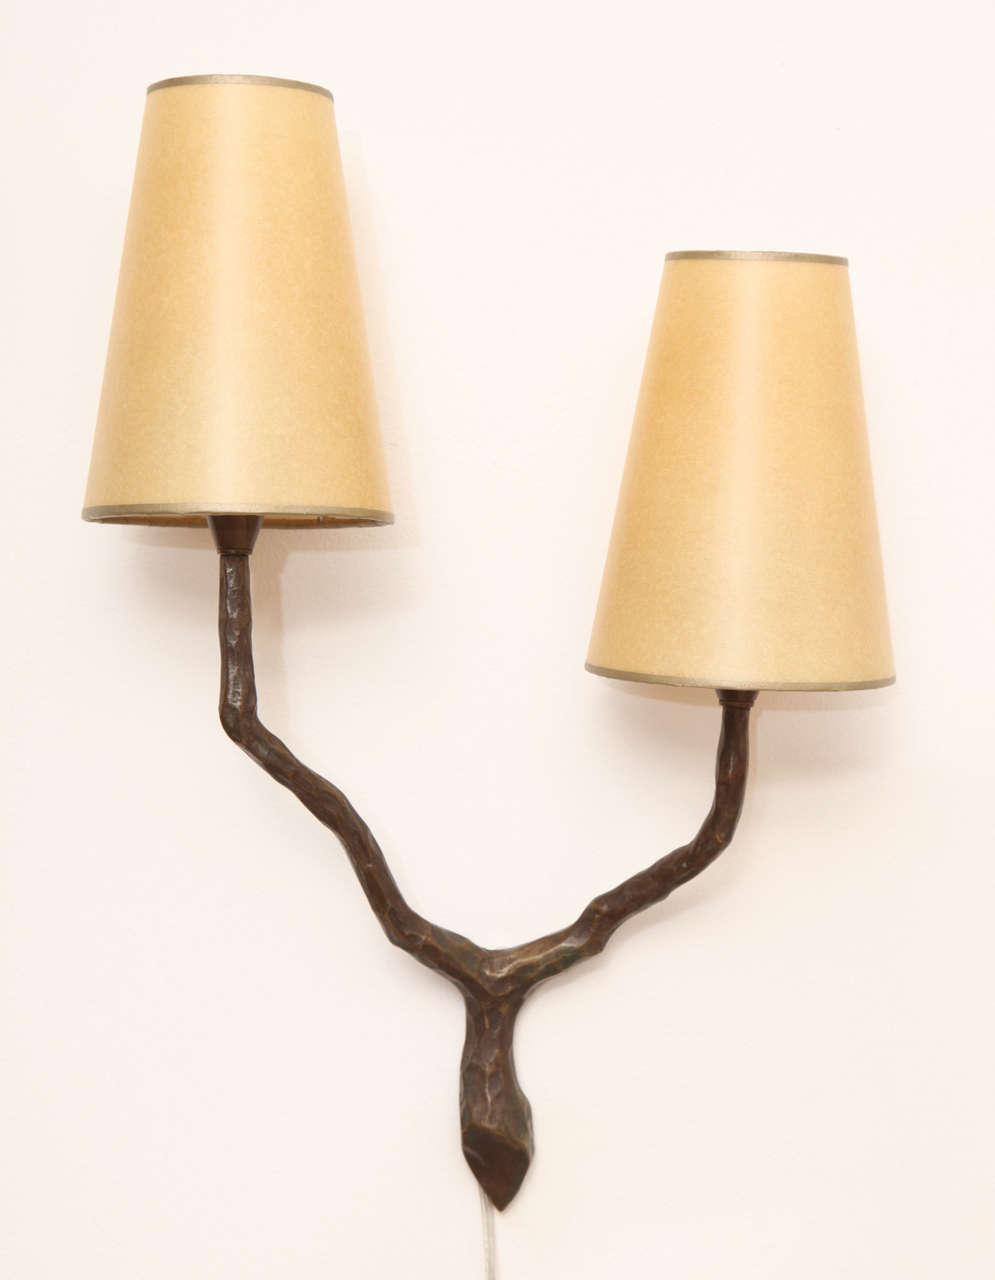 Felix Agostini (1910-1980).
Pair of two arm sconces in patinated bronze with parchment shades. 
French, circa 1960.